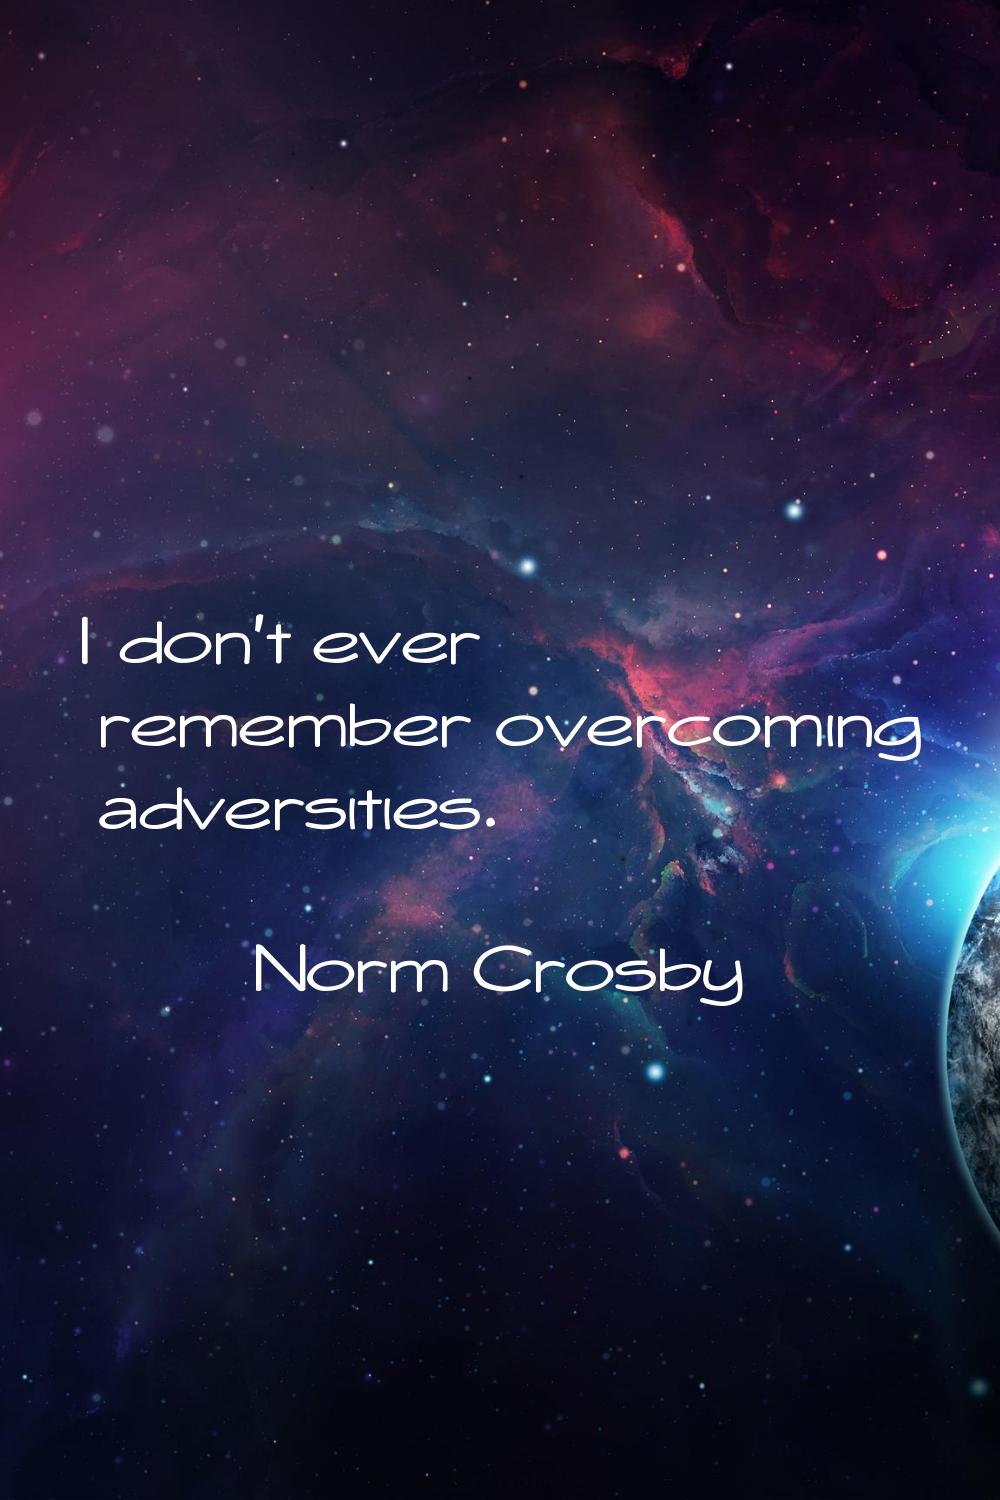 I don't ever remember overcoming adversities.